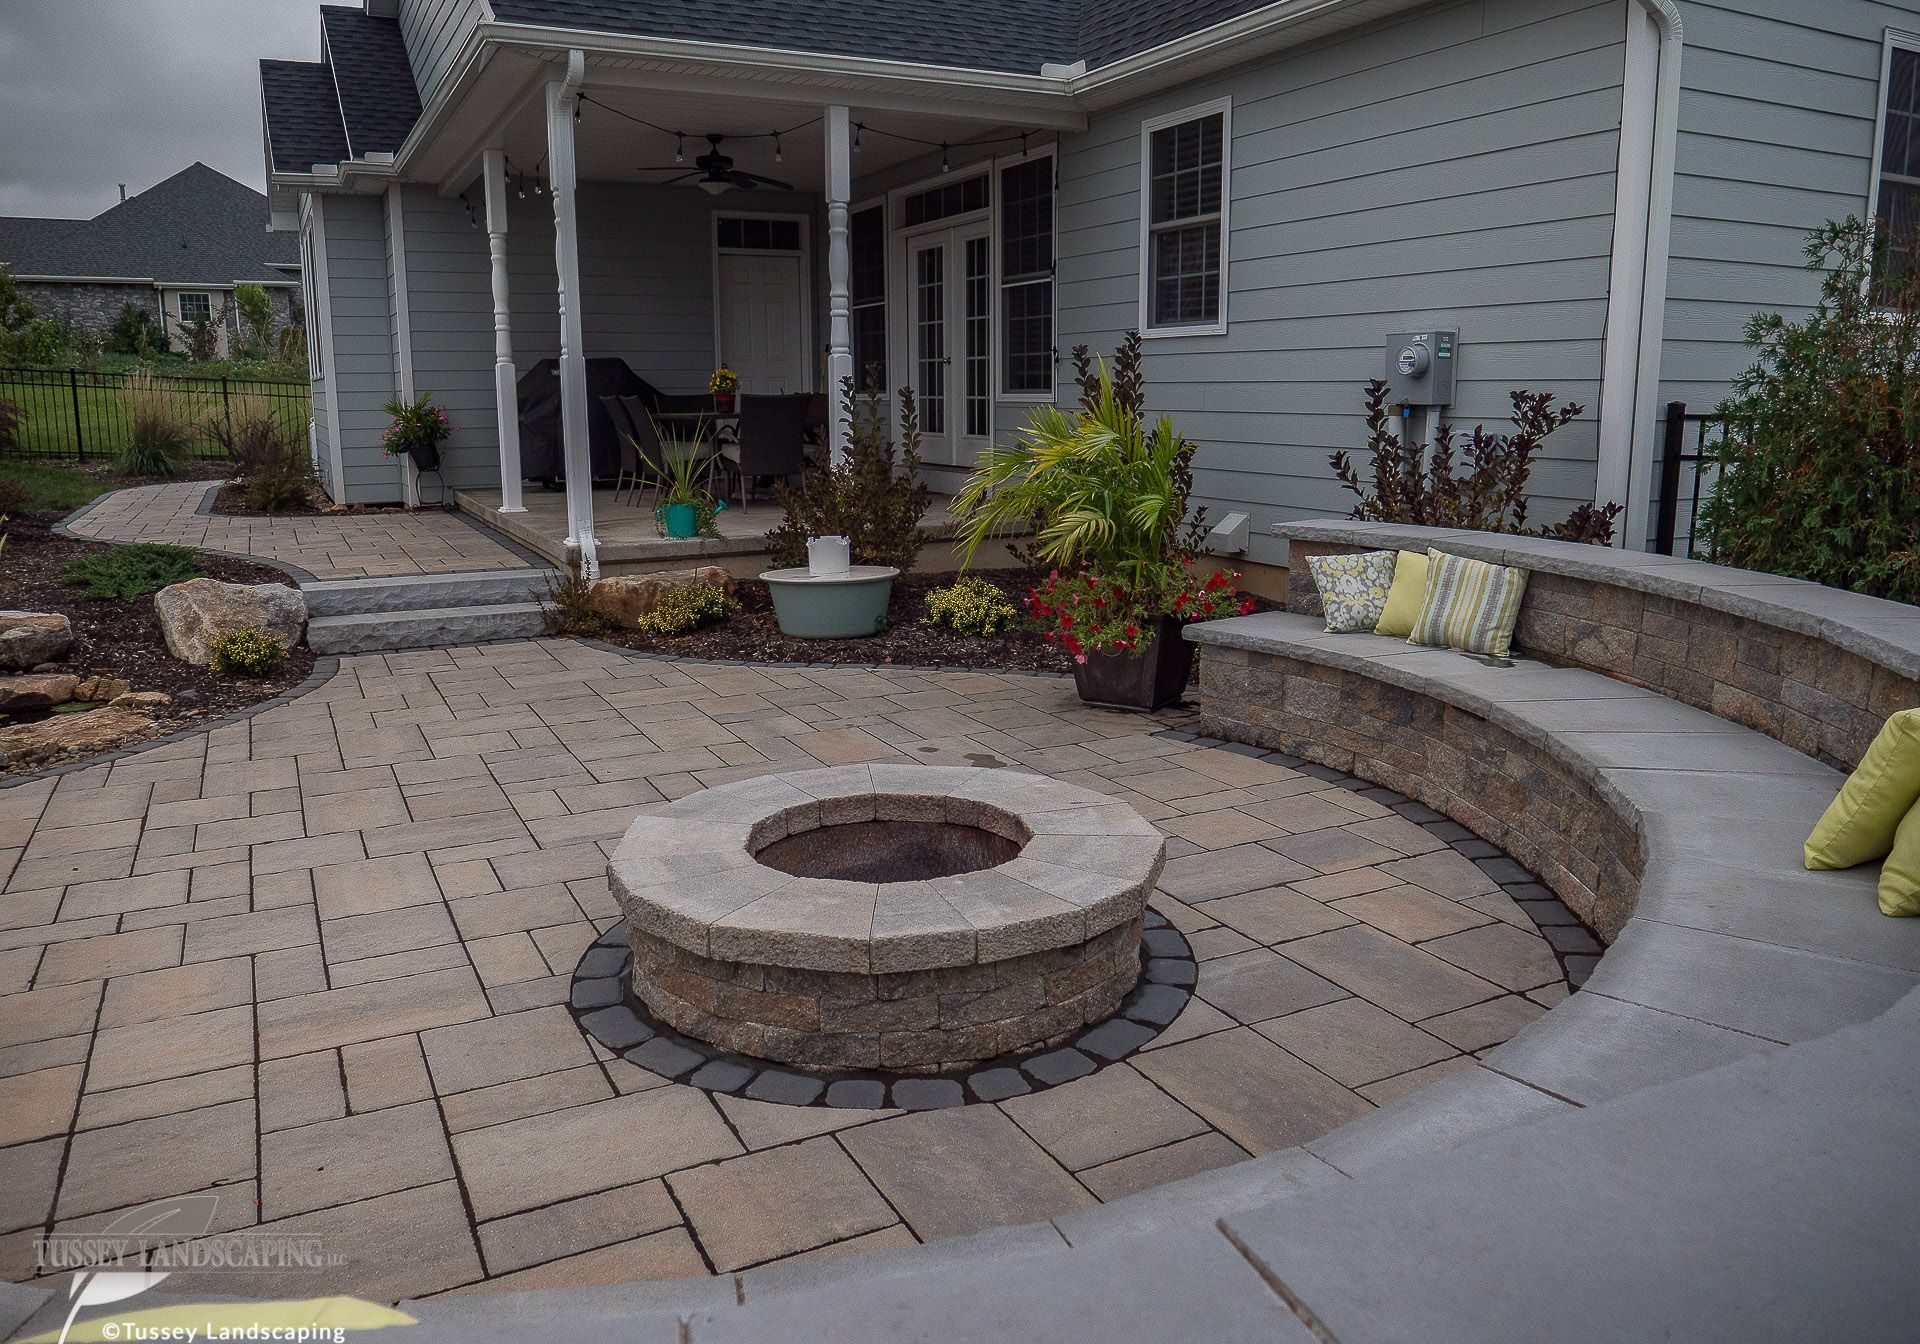 A patio with a fire pit and seating area.